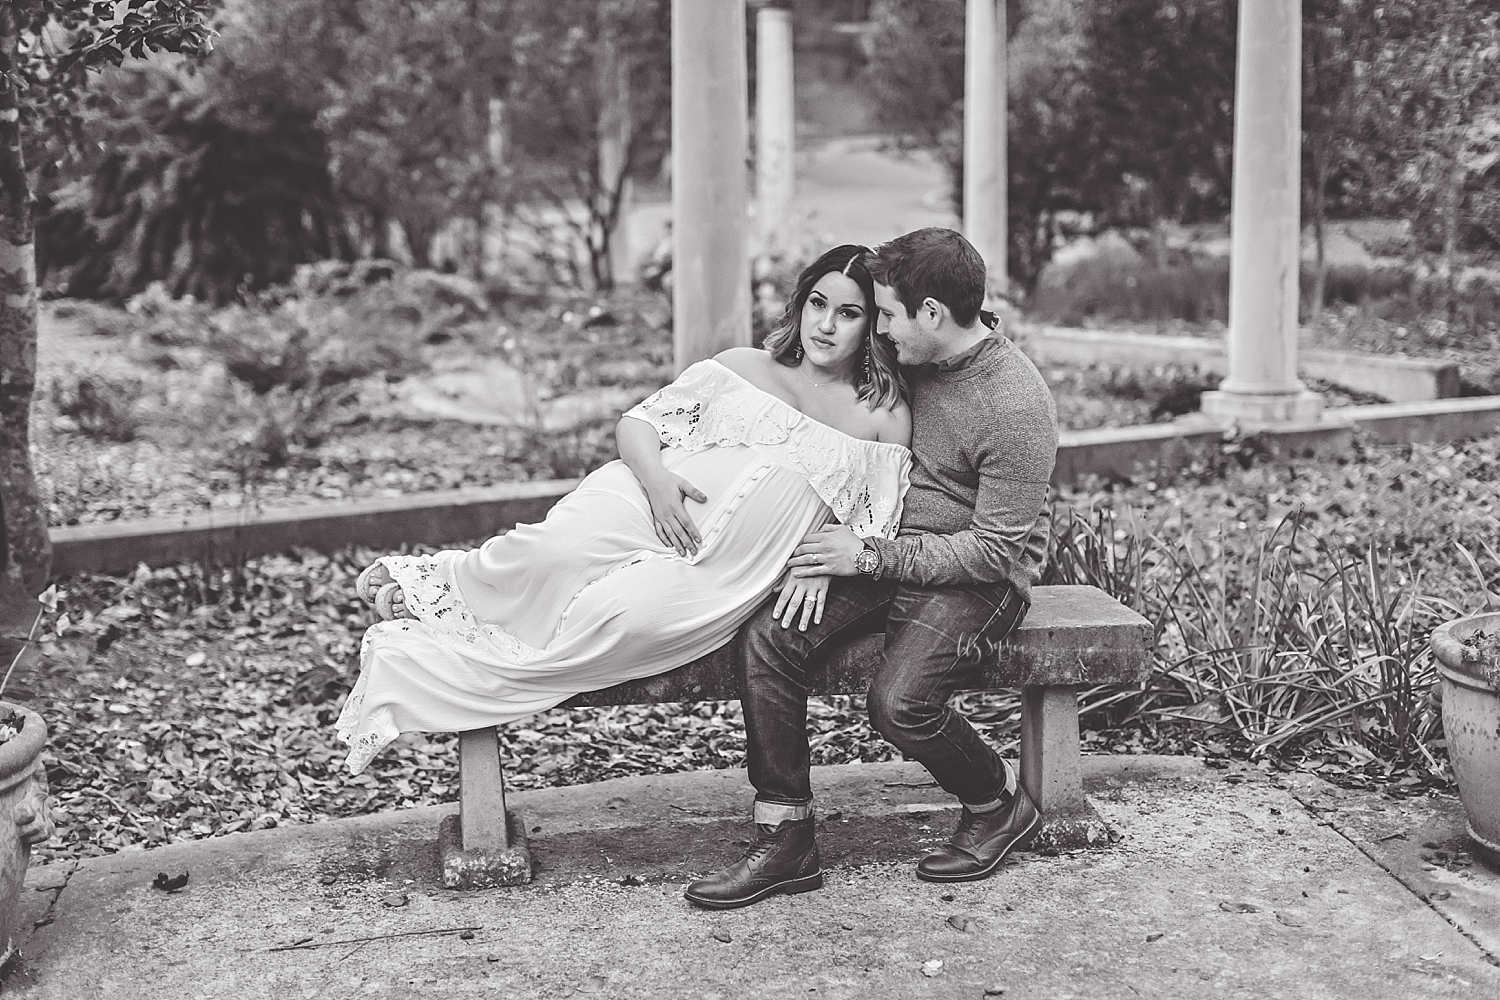  Black and white image of a man sitting on a stone bench, smiling down at his pregnant wife leans on him and has one hand on her belly.  